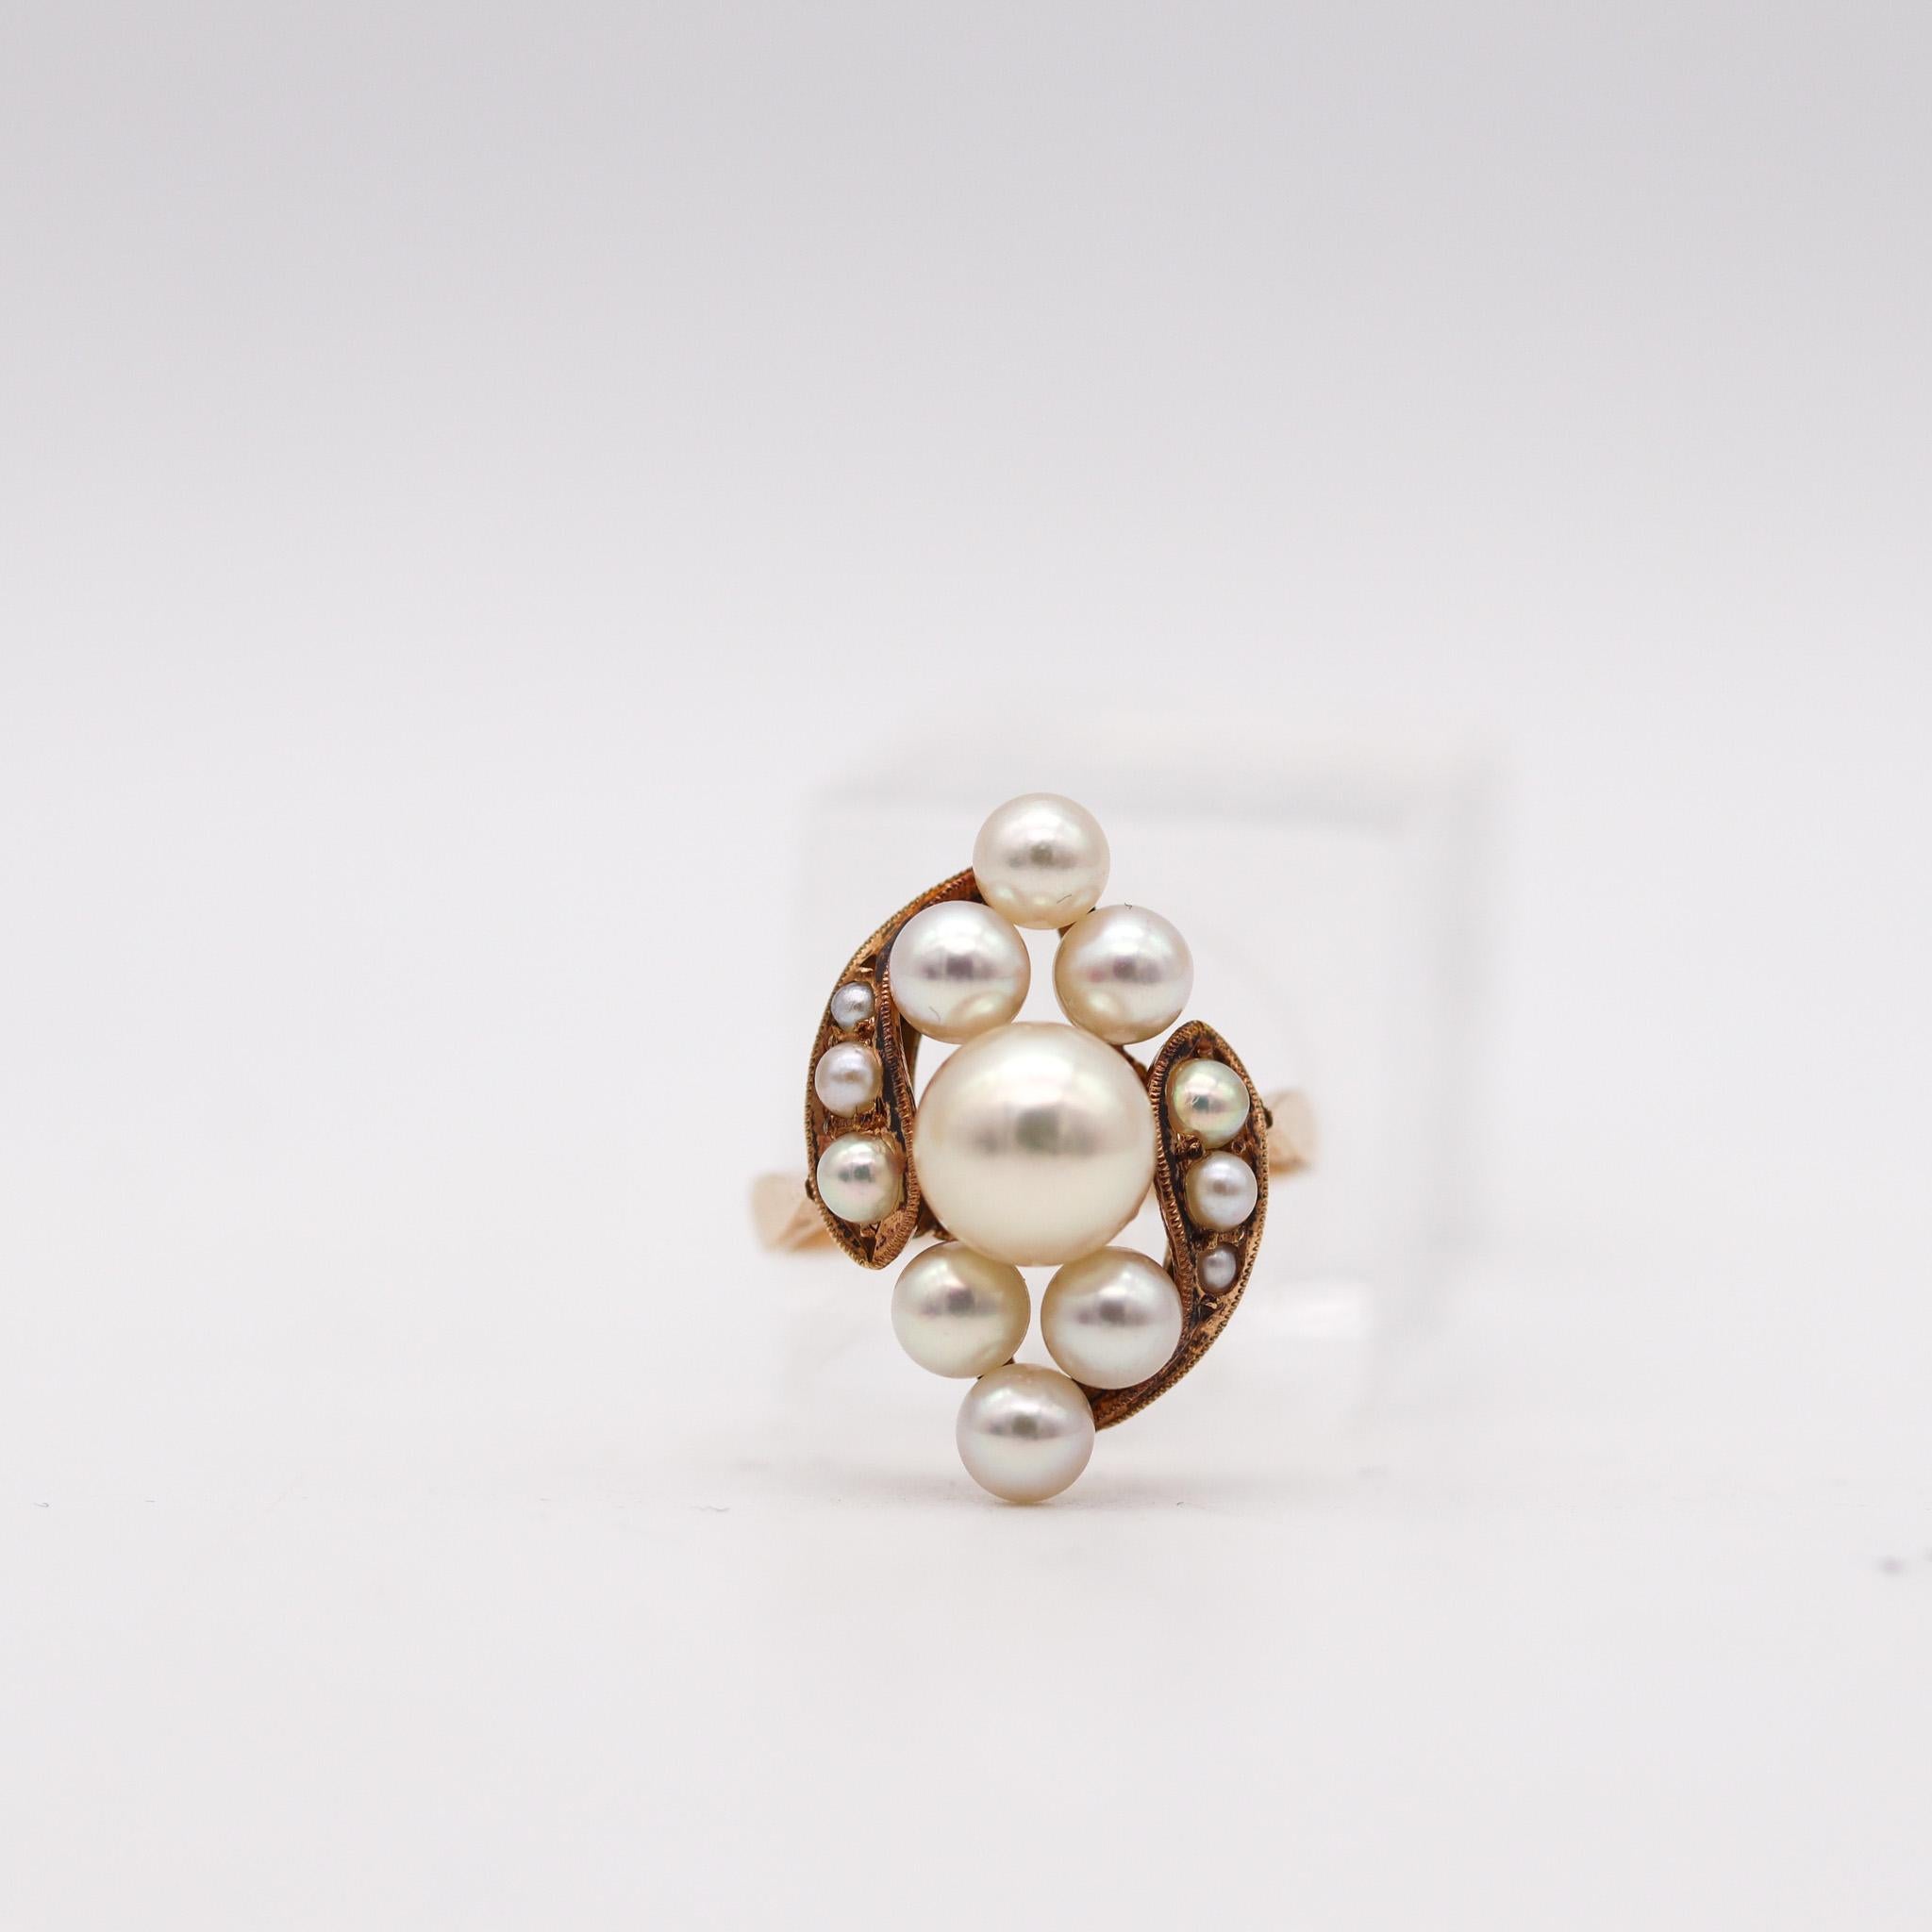 Victorian classic cluster ring with pearls.

Beautiful antique ring, created in England at the end of the Victorian period, back in the 1900. This ring has been designed with classic patterns as a cluster. It was crafted in rich yellow gold of 14